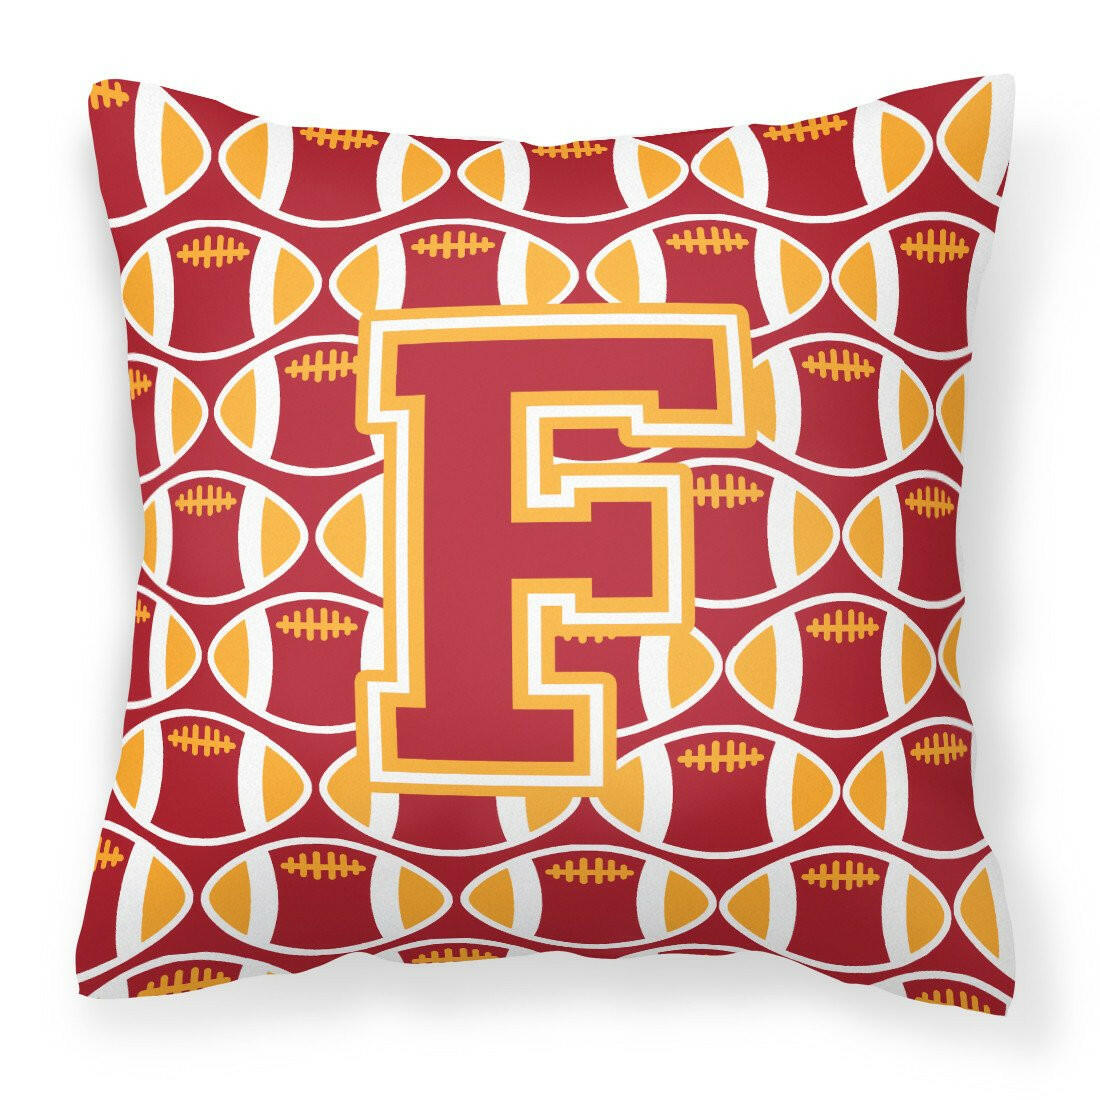 Letter F Football Cardinal and Gold Fabric Decorative Pillow CJ1070-FPW1414 by Caroline's Treasures